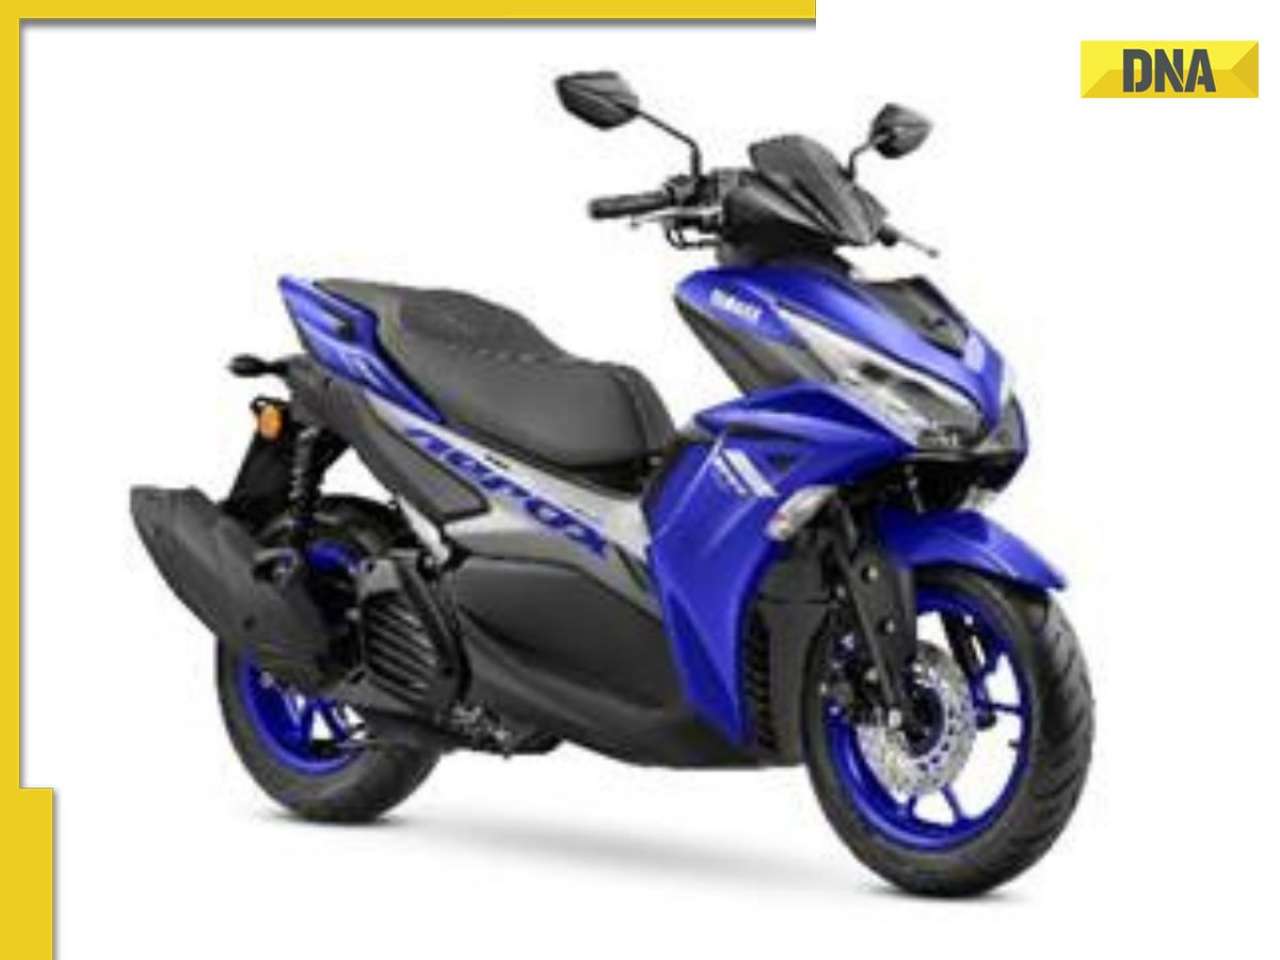 Yamaha Aerox 155 Version S with smart key launched in India, priced at Rs 1,50,600